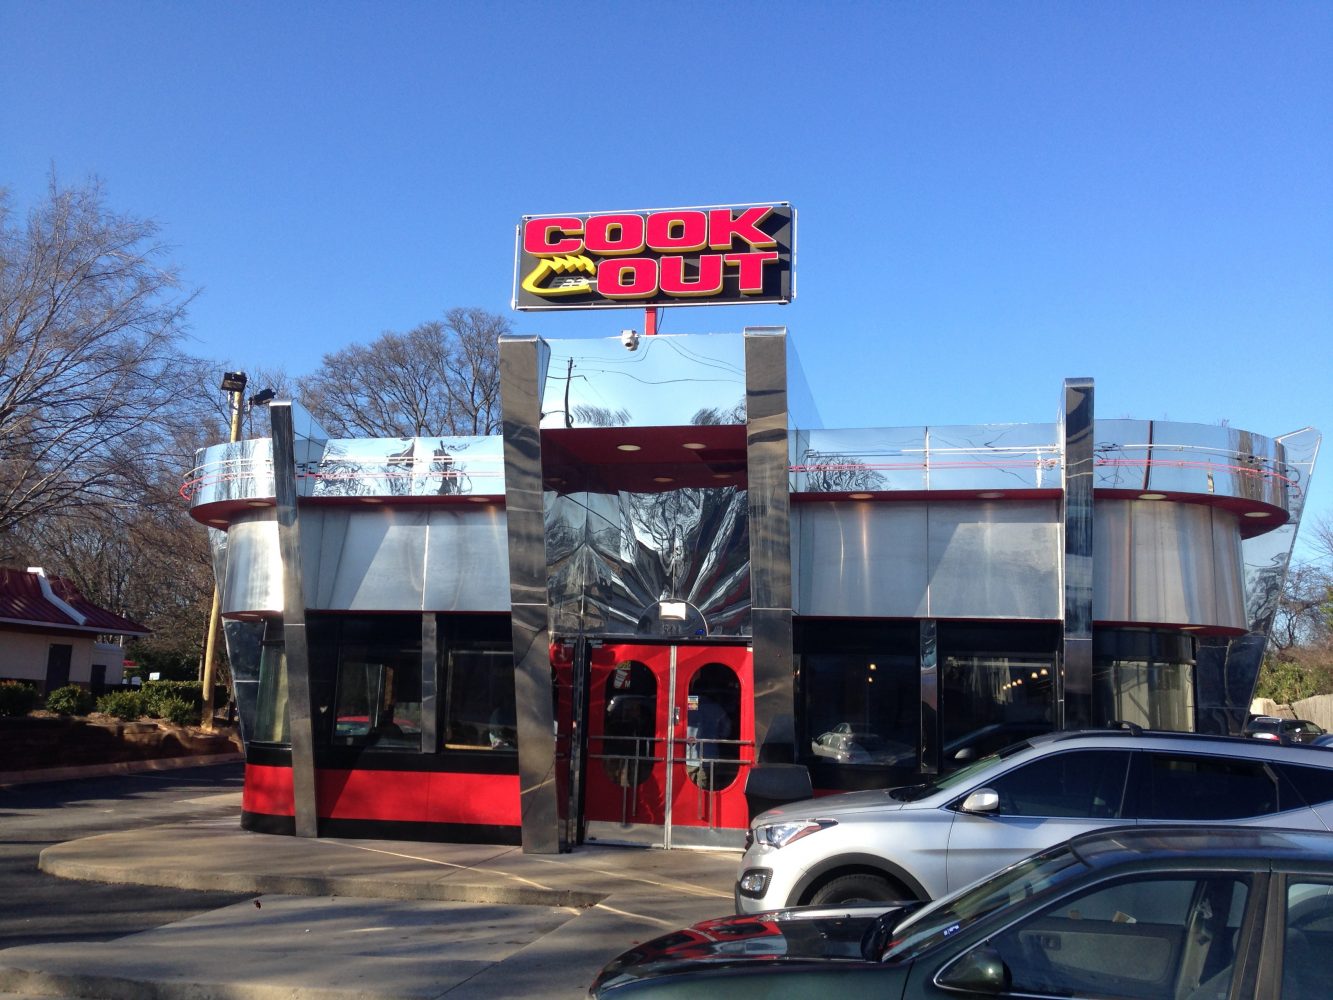 The new Cookout is located on Ponce de Leon Avenue. It replaced Zesto, but kept the same exterior design